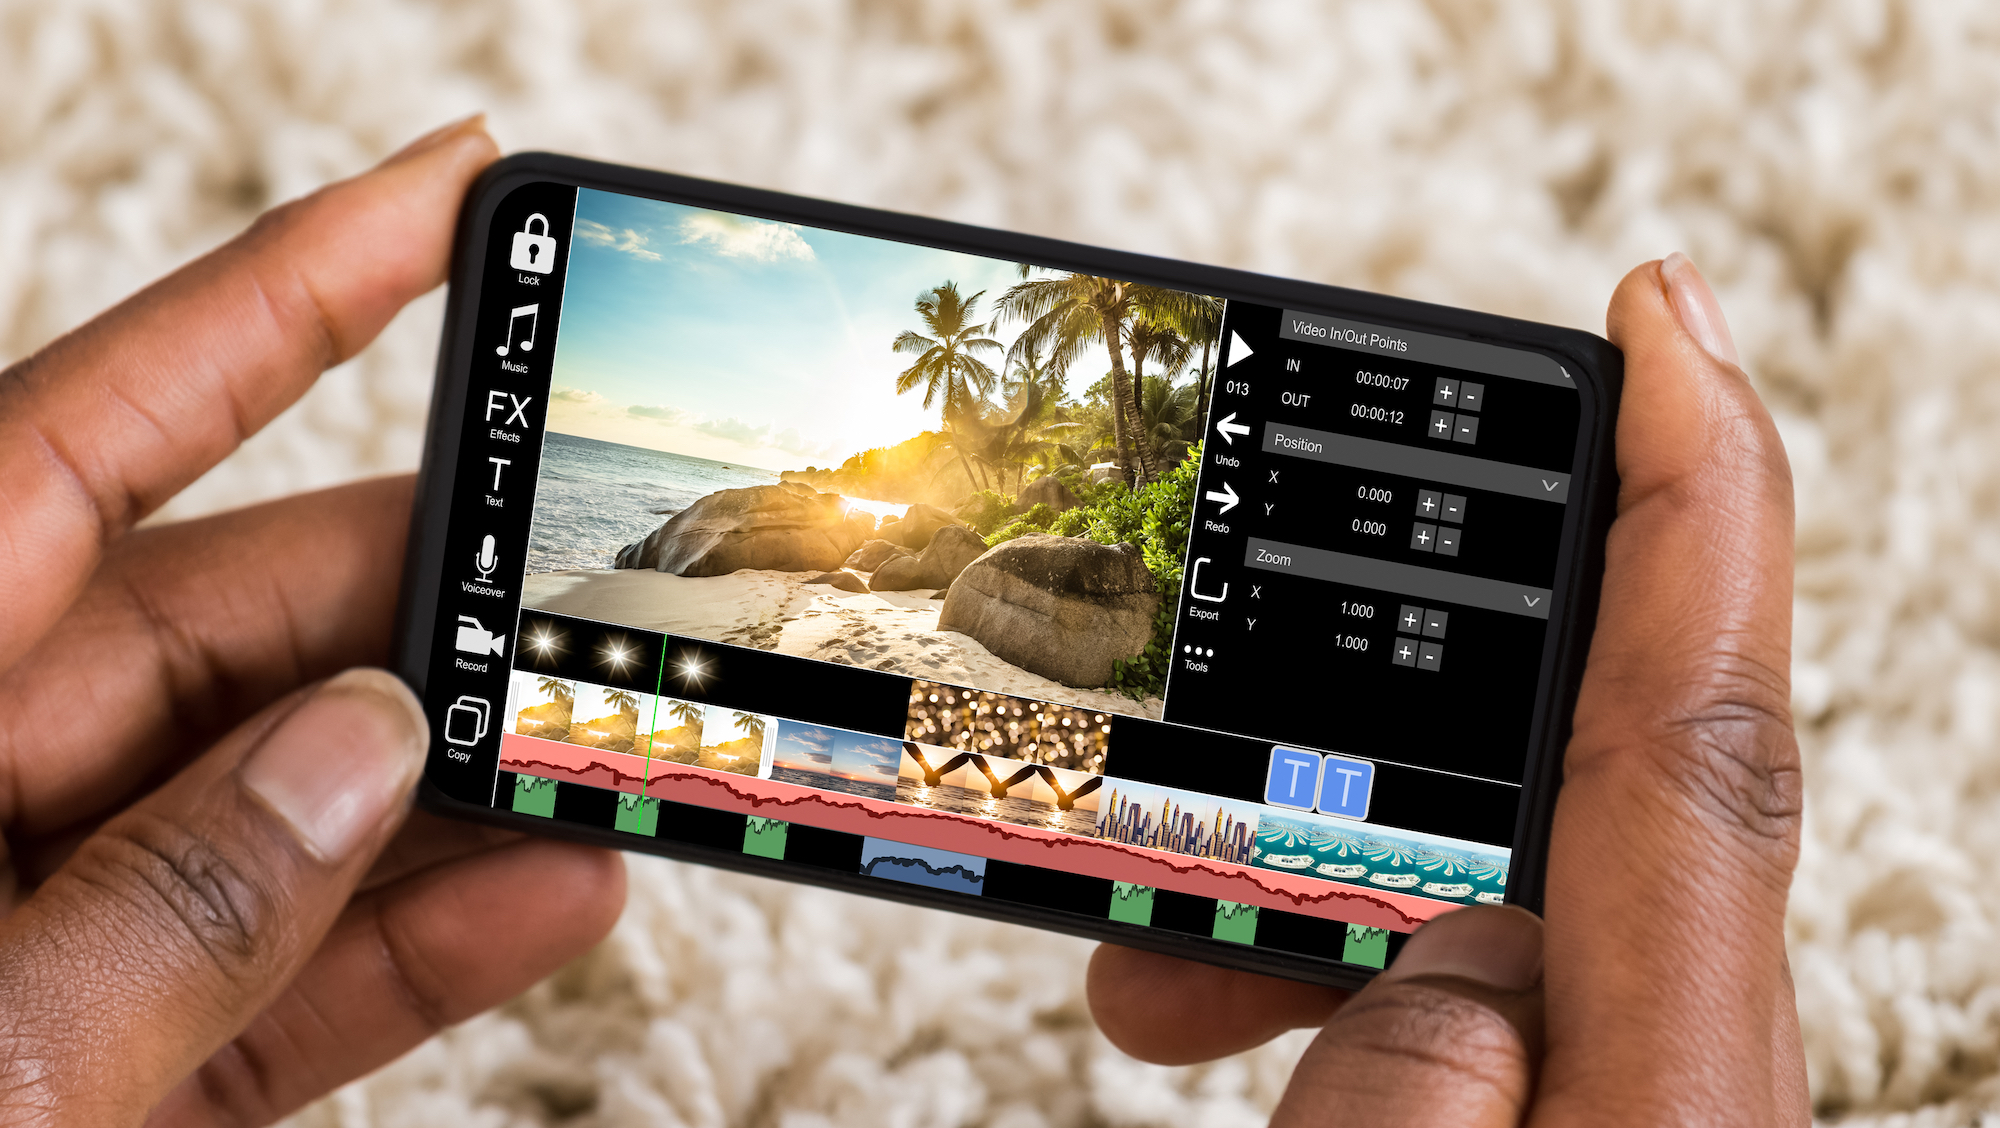 video editing apps for smartphones